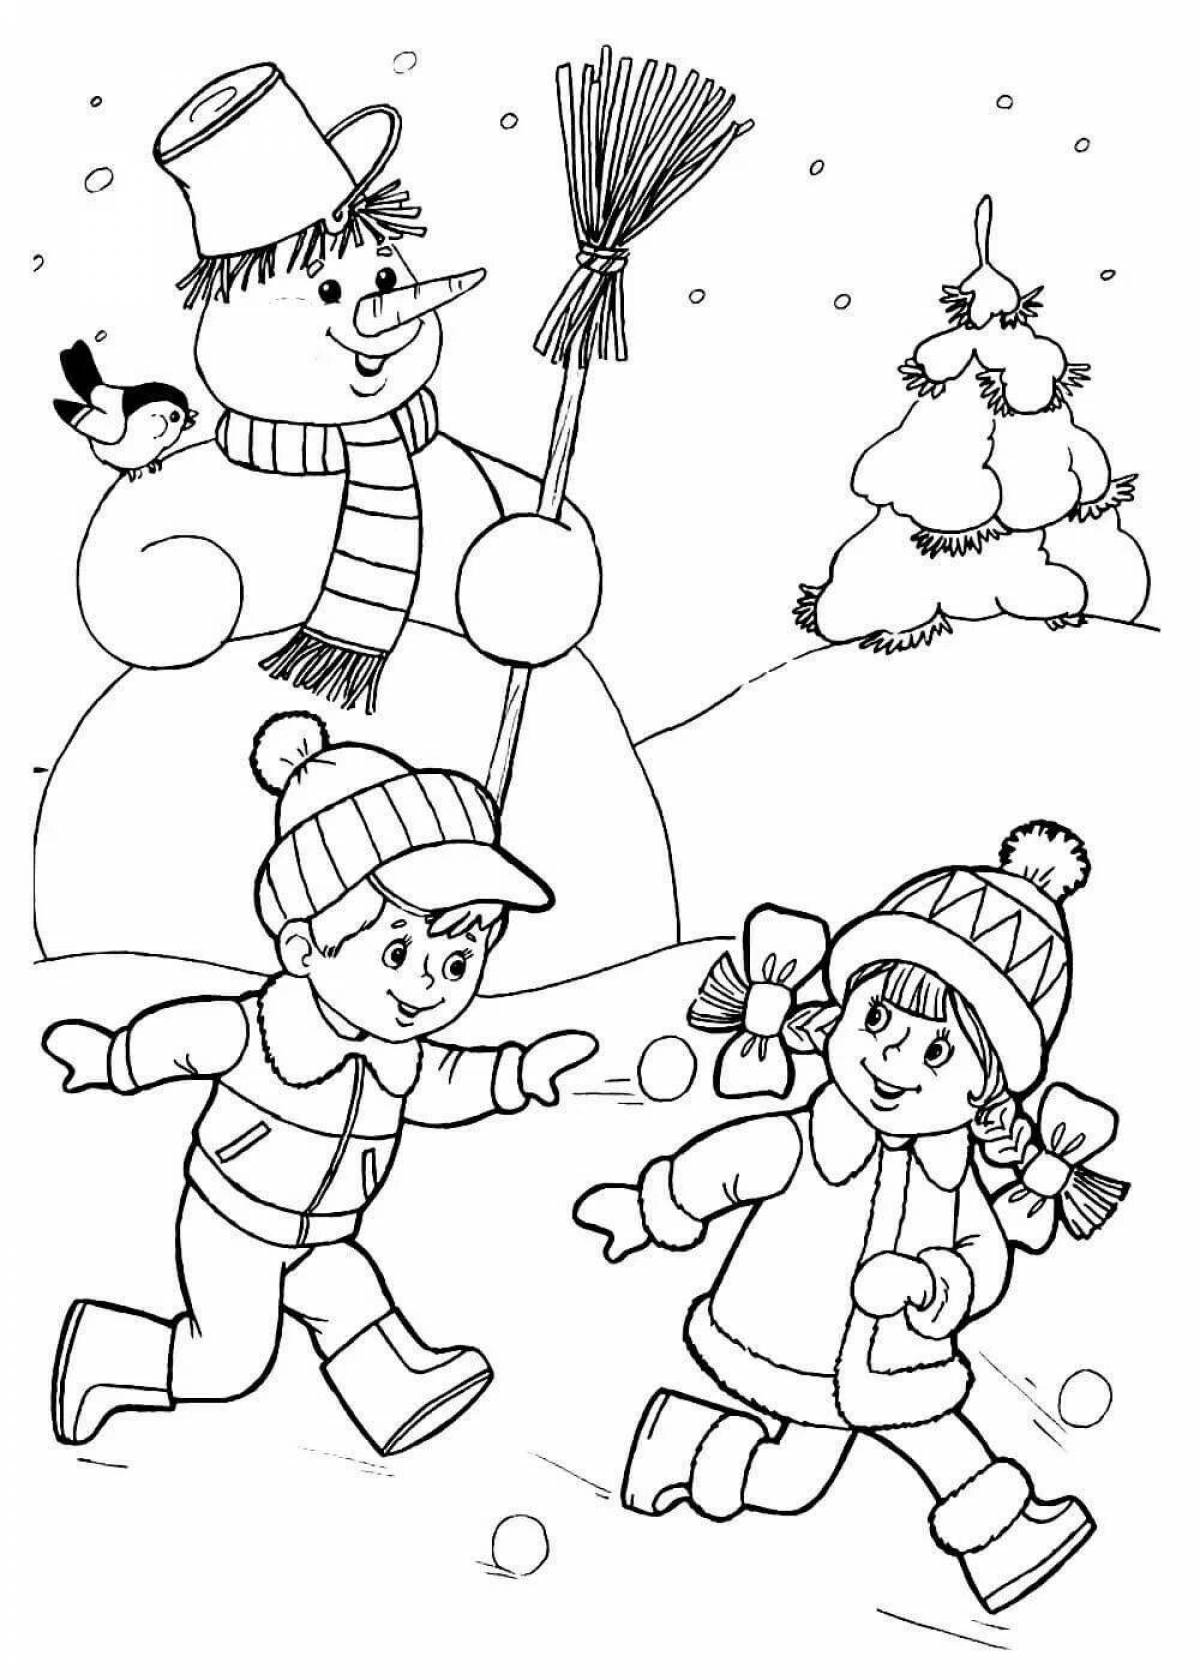 Coloring page energetic children playing snowballs